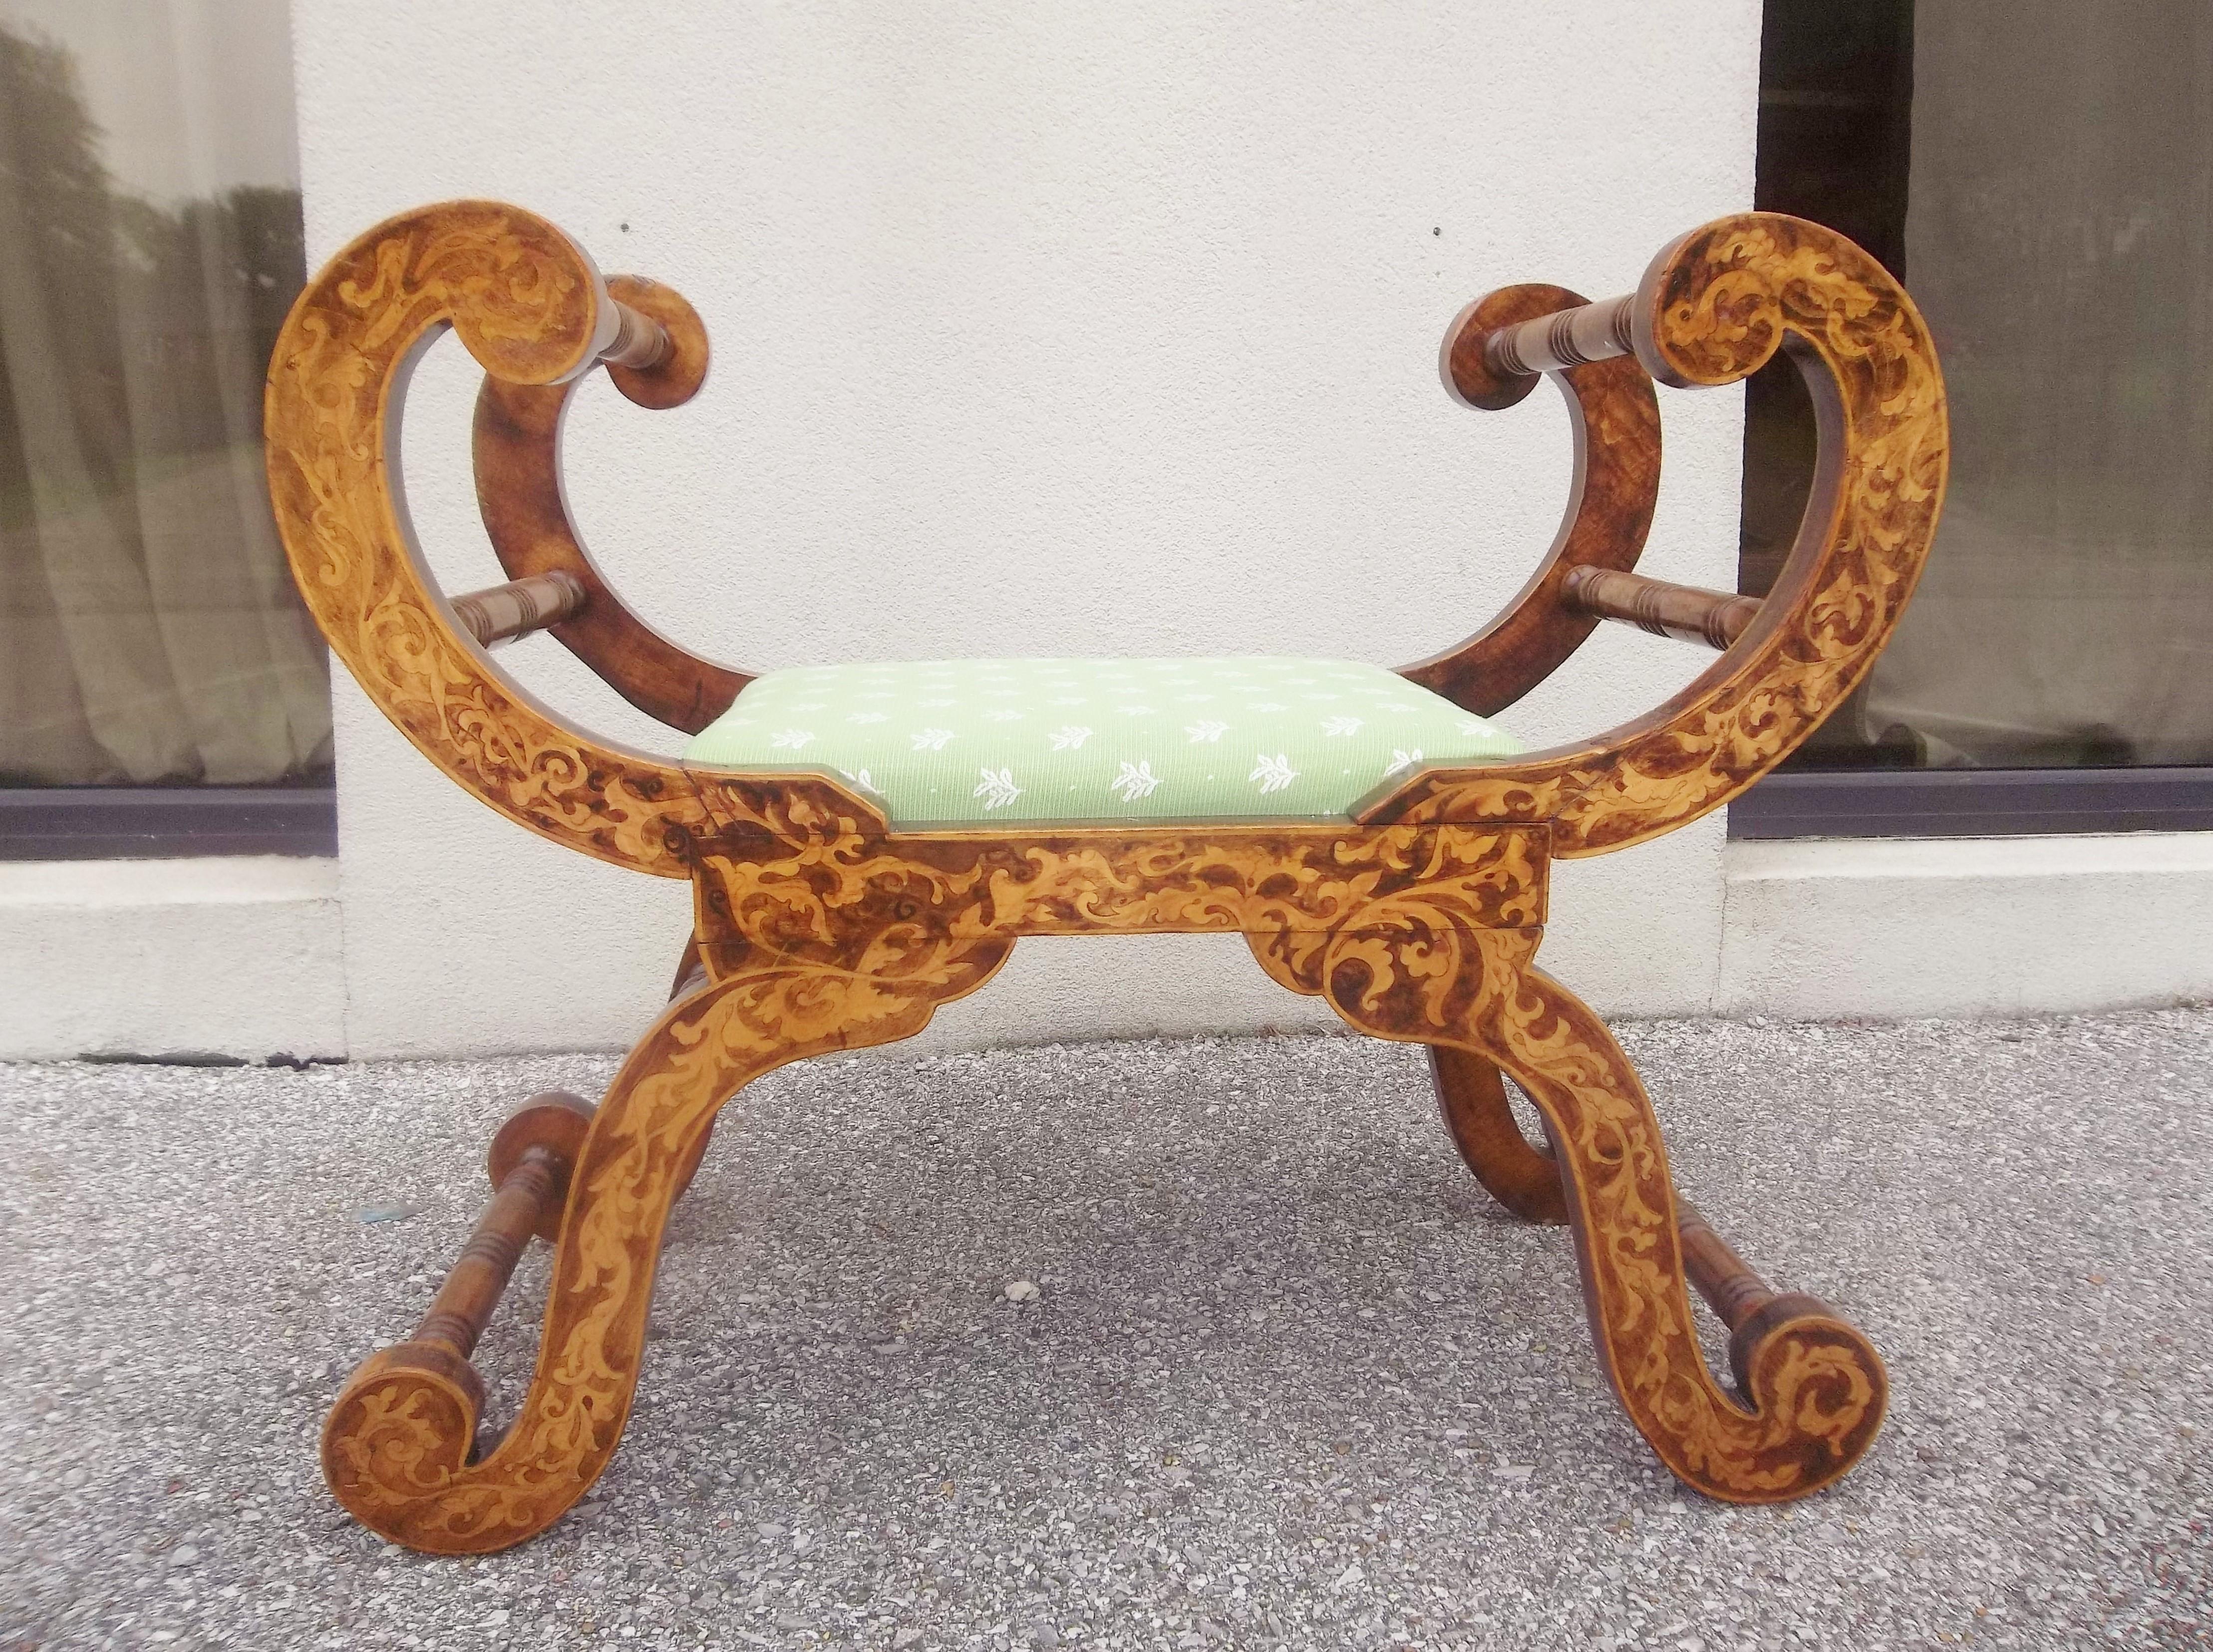 20th Century Grained English Regency Style Curule Form Window Seat or Bench